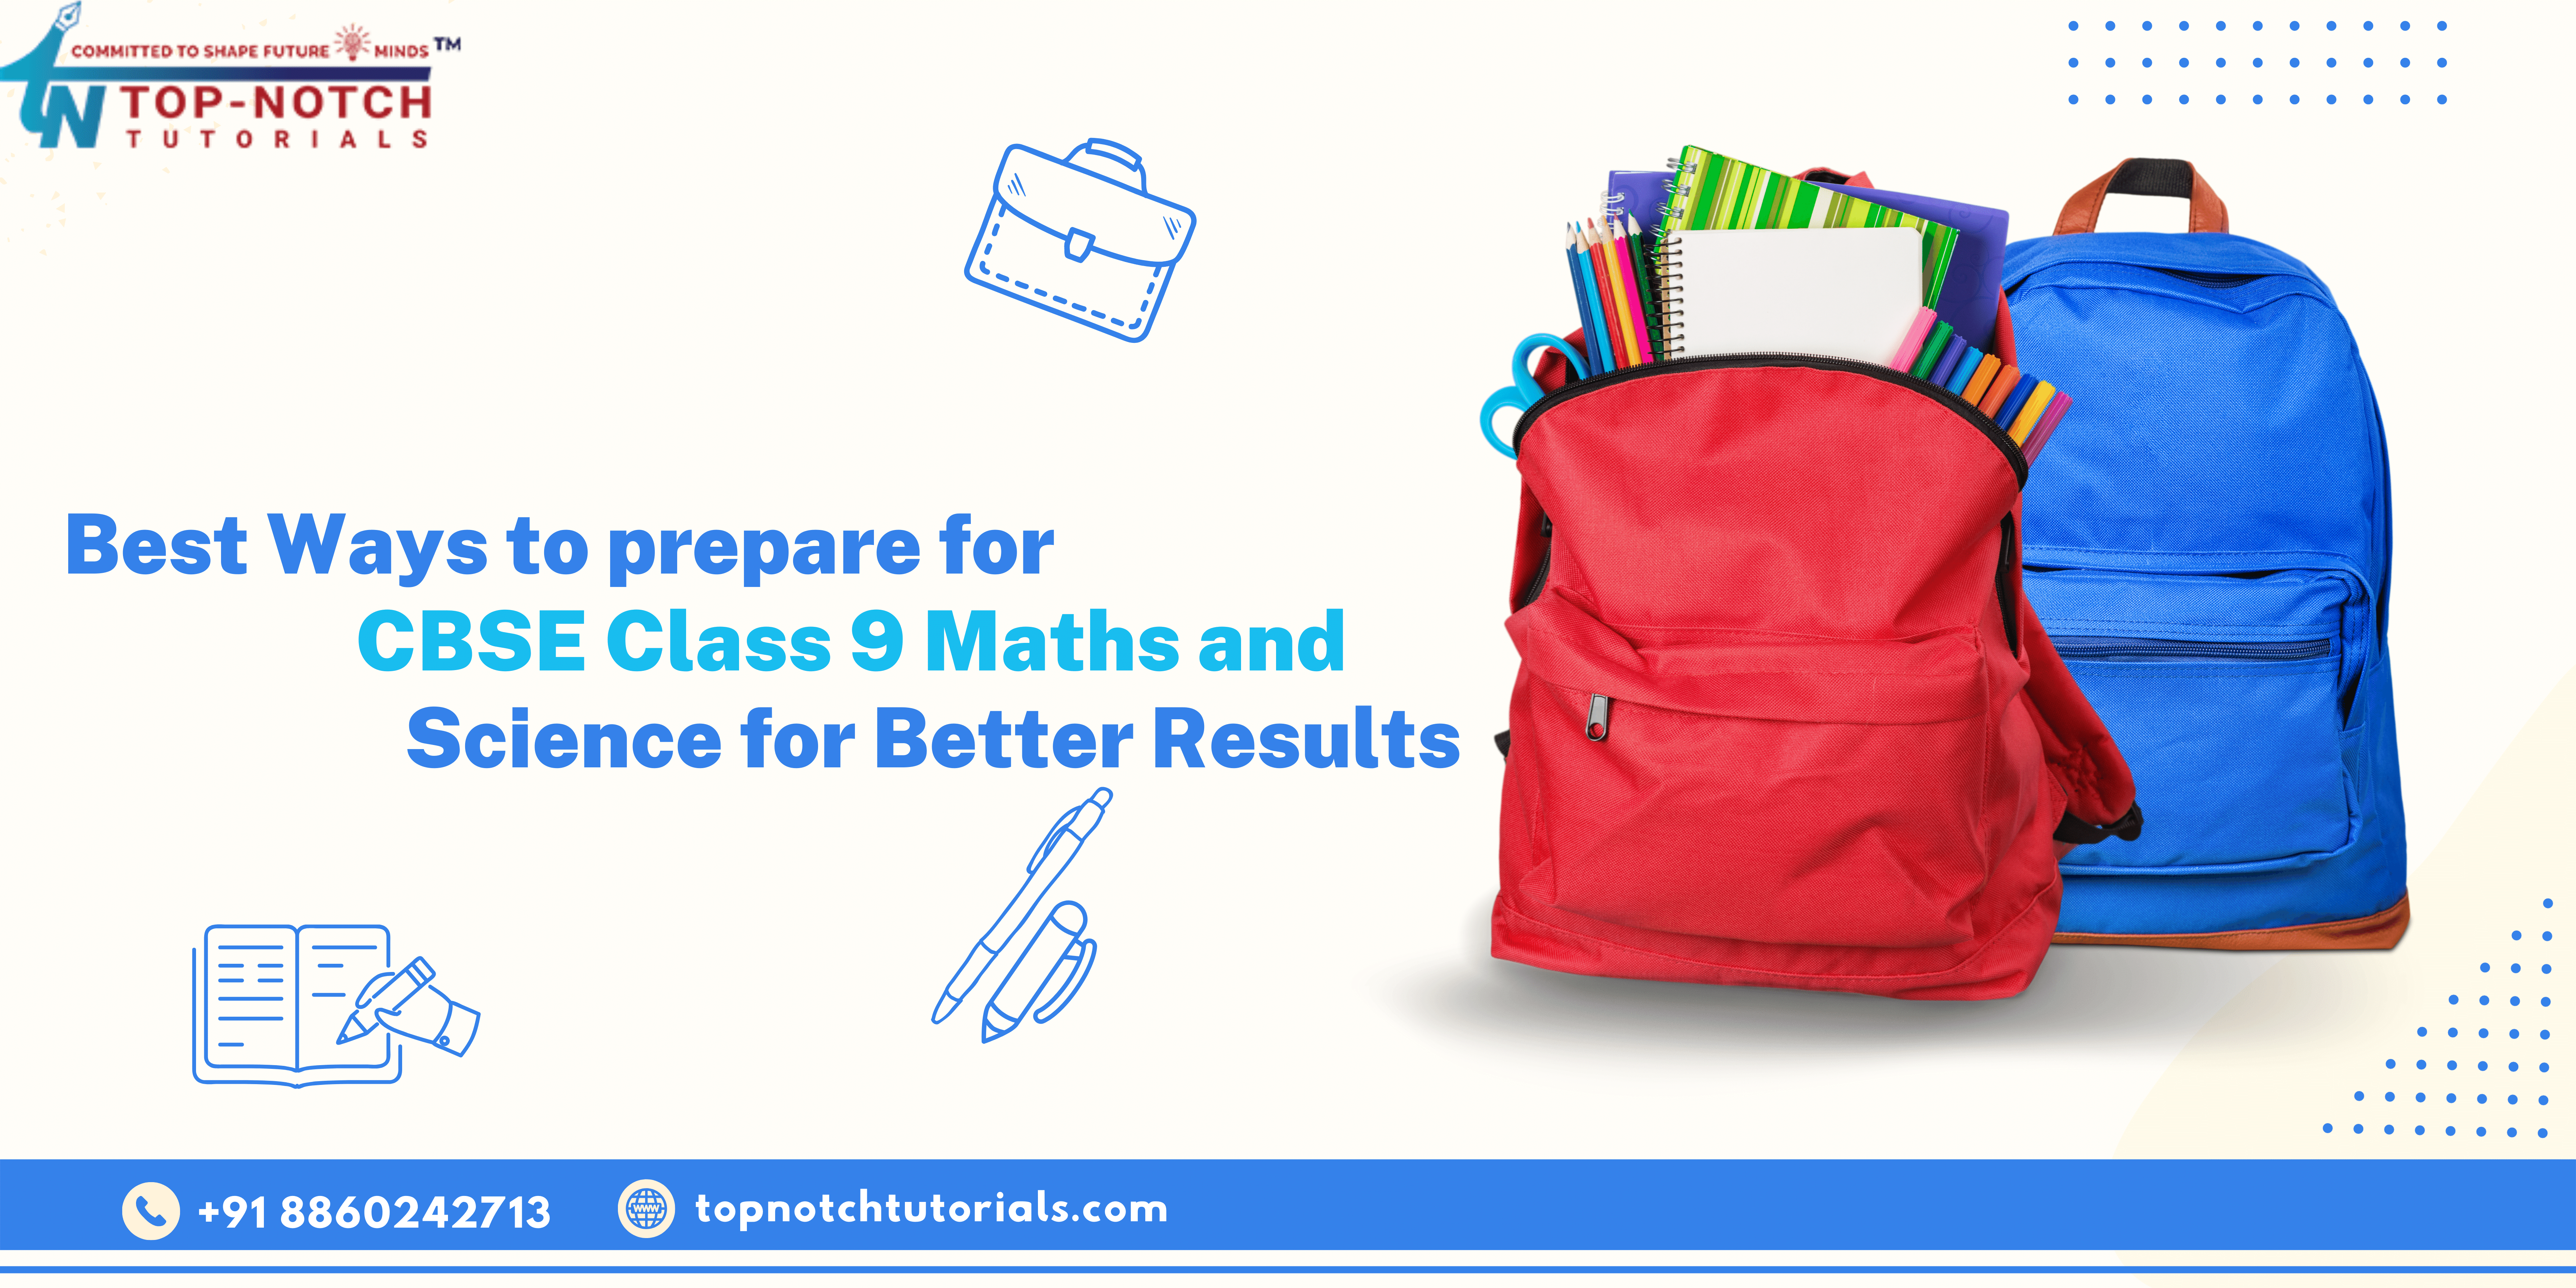 Best Ways to Prepare for CBSE Class 9 Maths and Science for Better Results